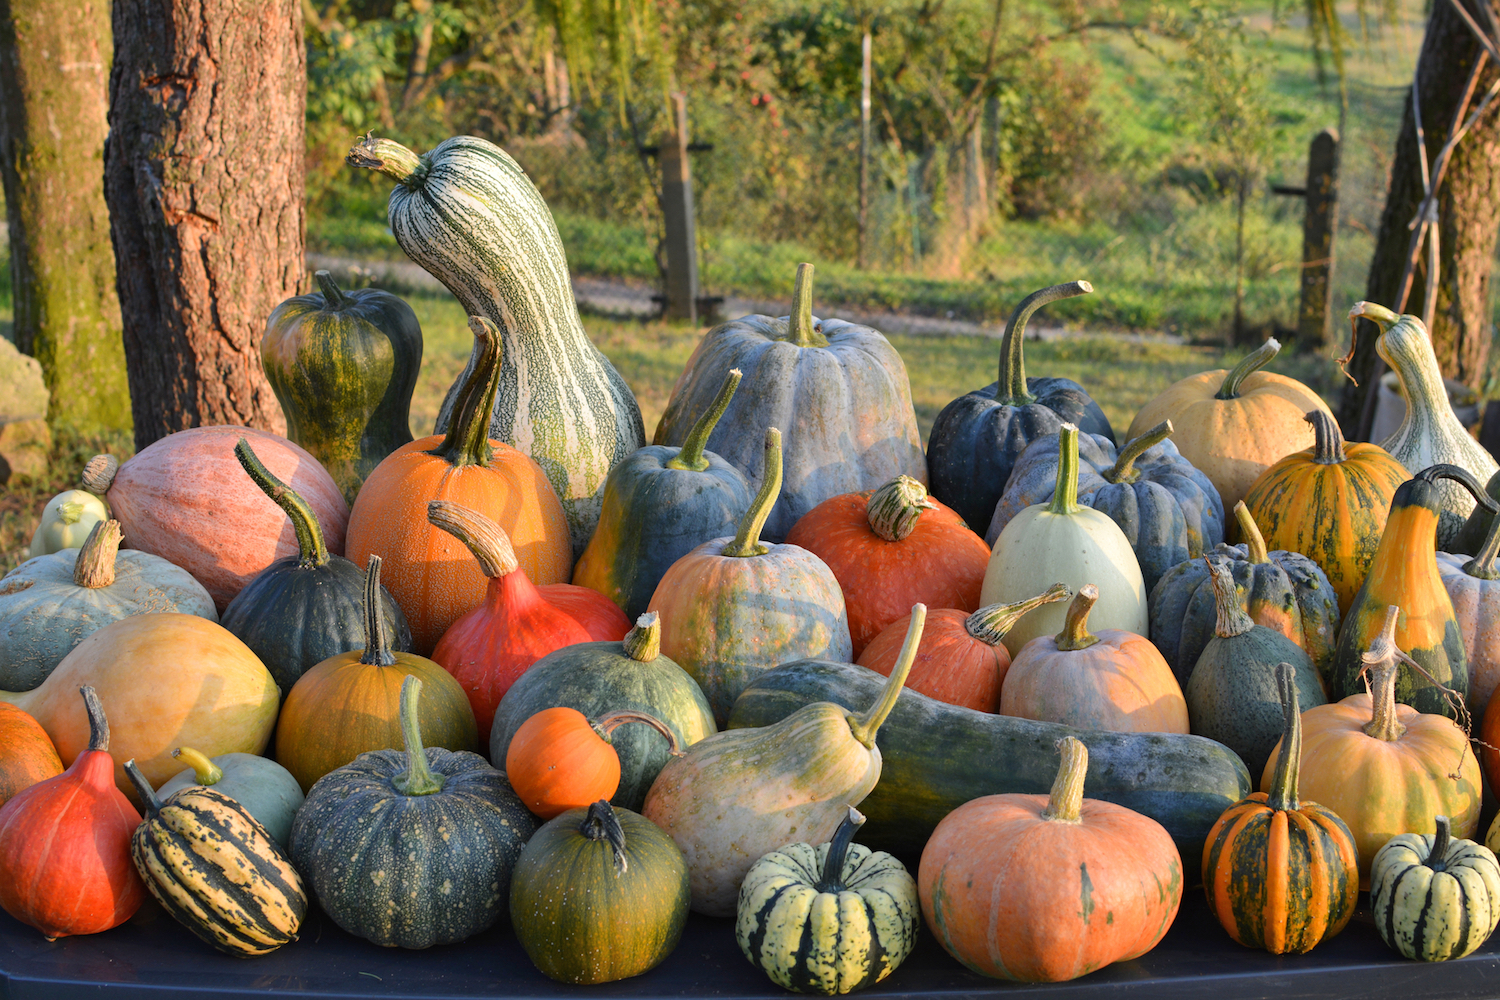 A variety of pumpkins and winter squashes